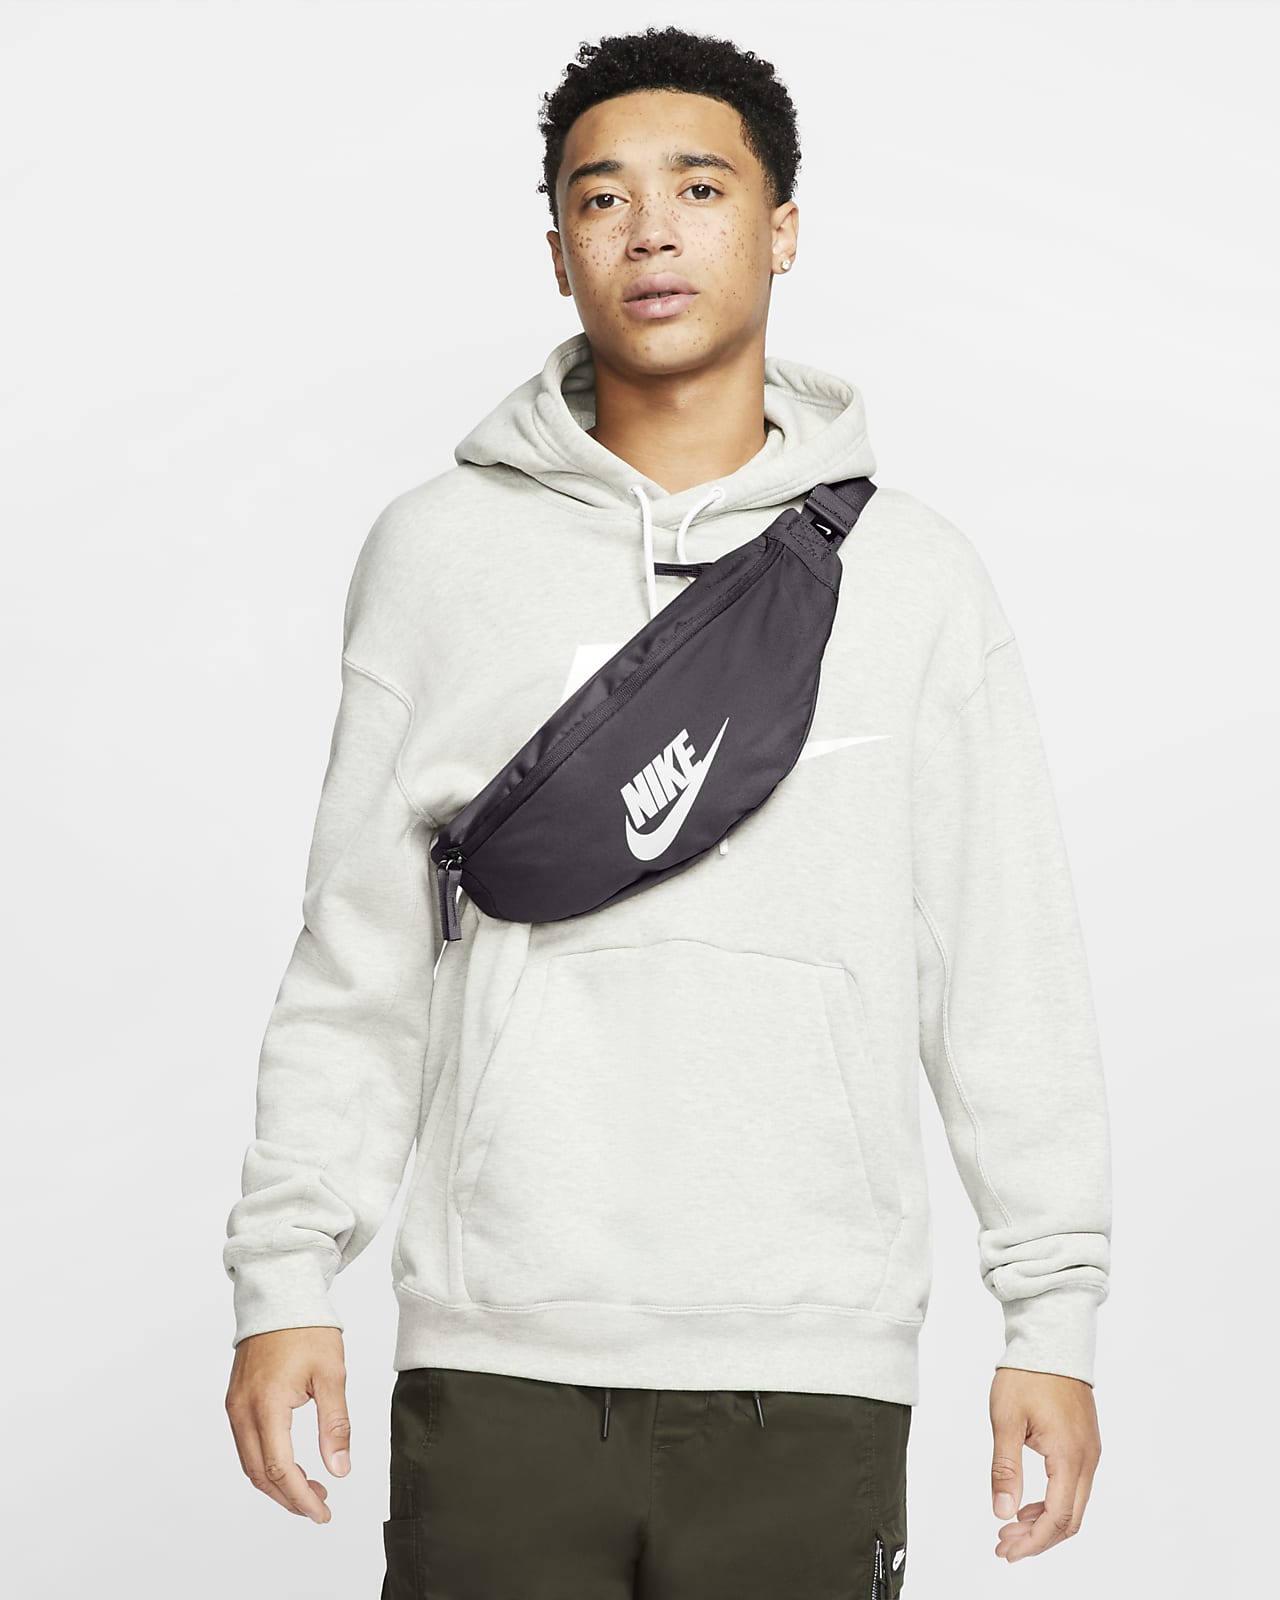 nike heritage fanny pack